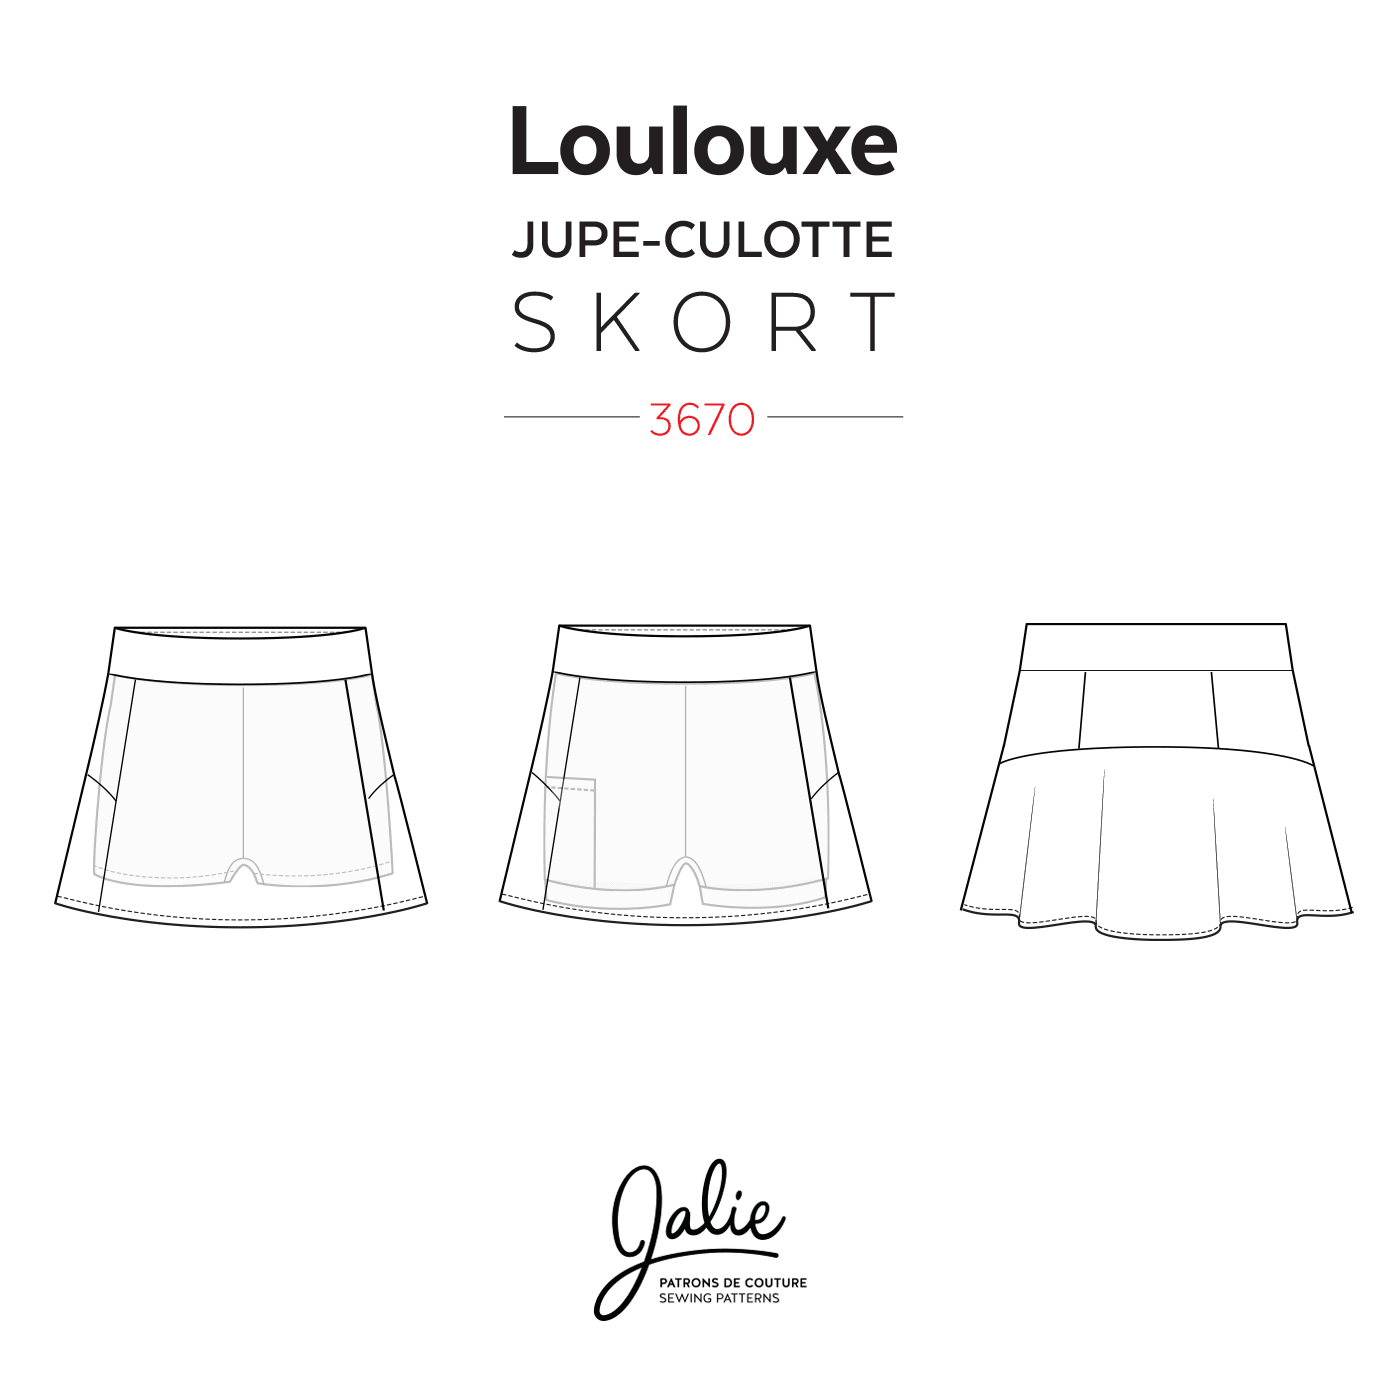 Jalie 3670 - LOULOUXE - Line Drawings